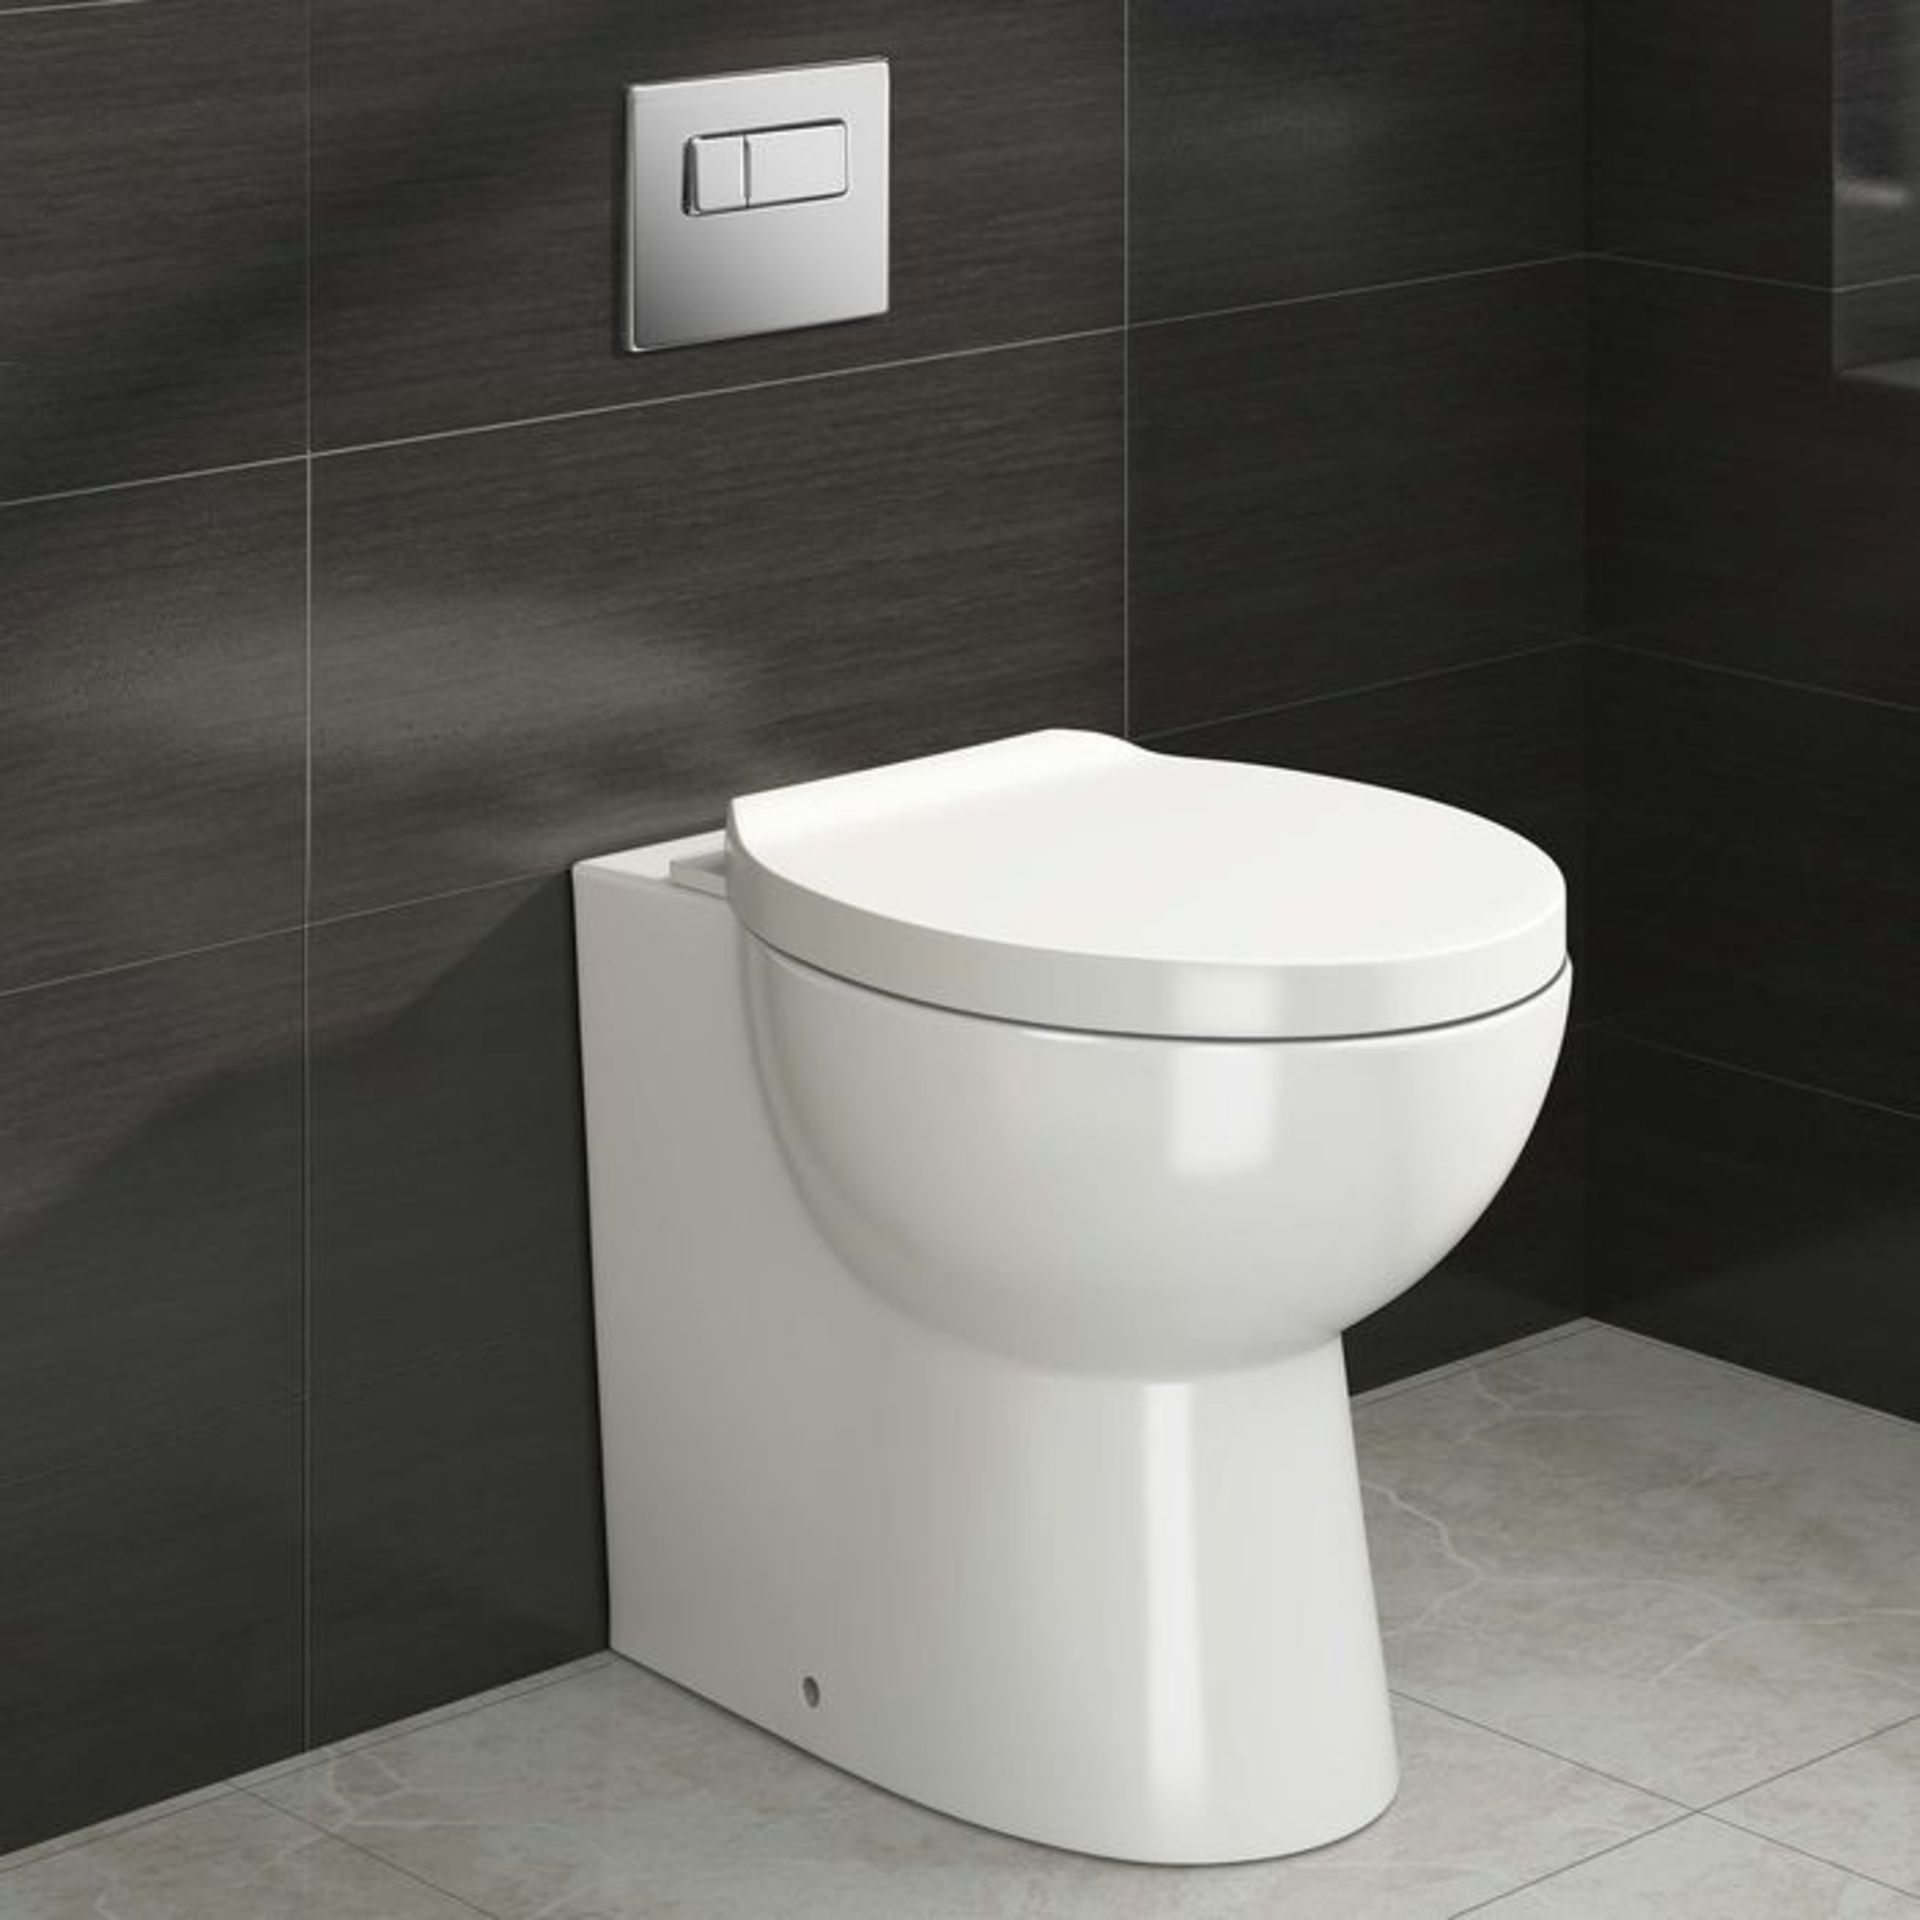 (G113) Crosby Back to Wall Toilet inc Soft Close Seat Made from White Vitreous China Finished in a - Image 3 of 3